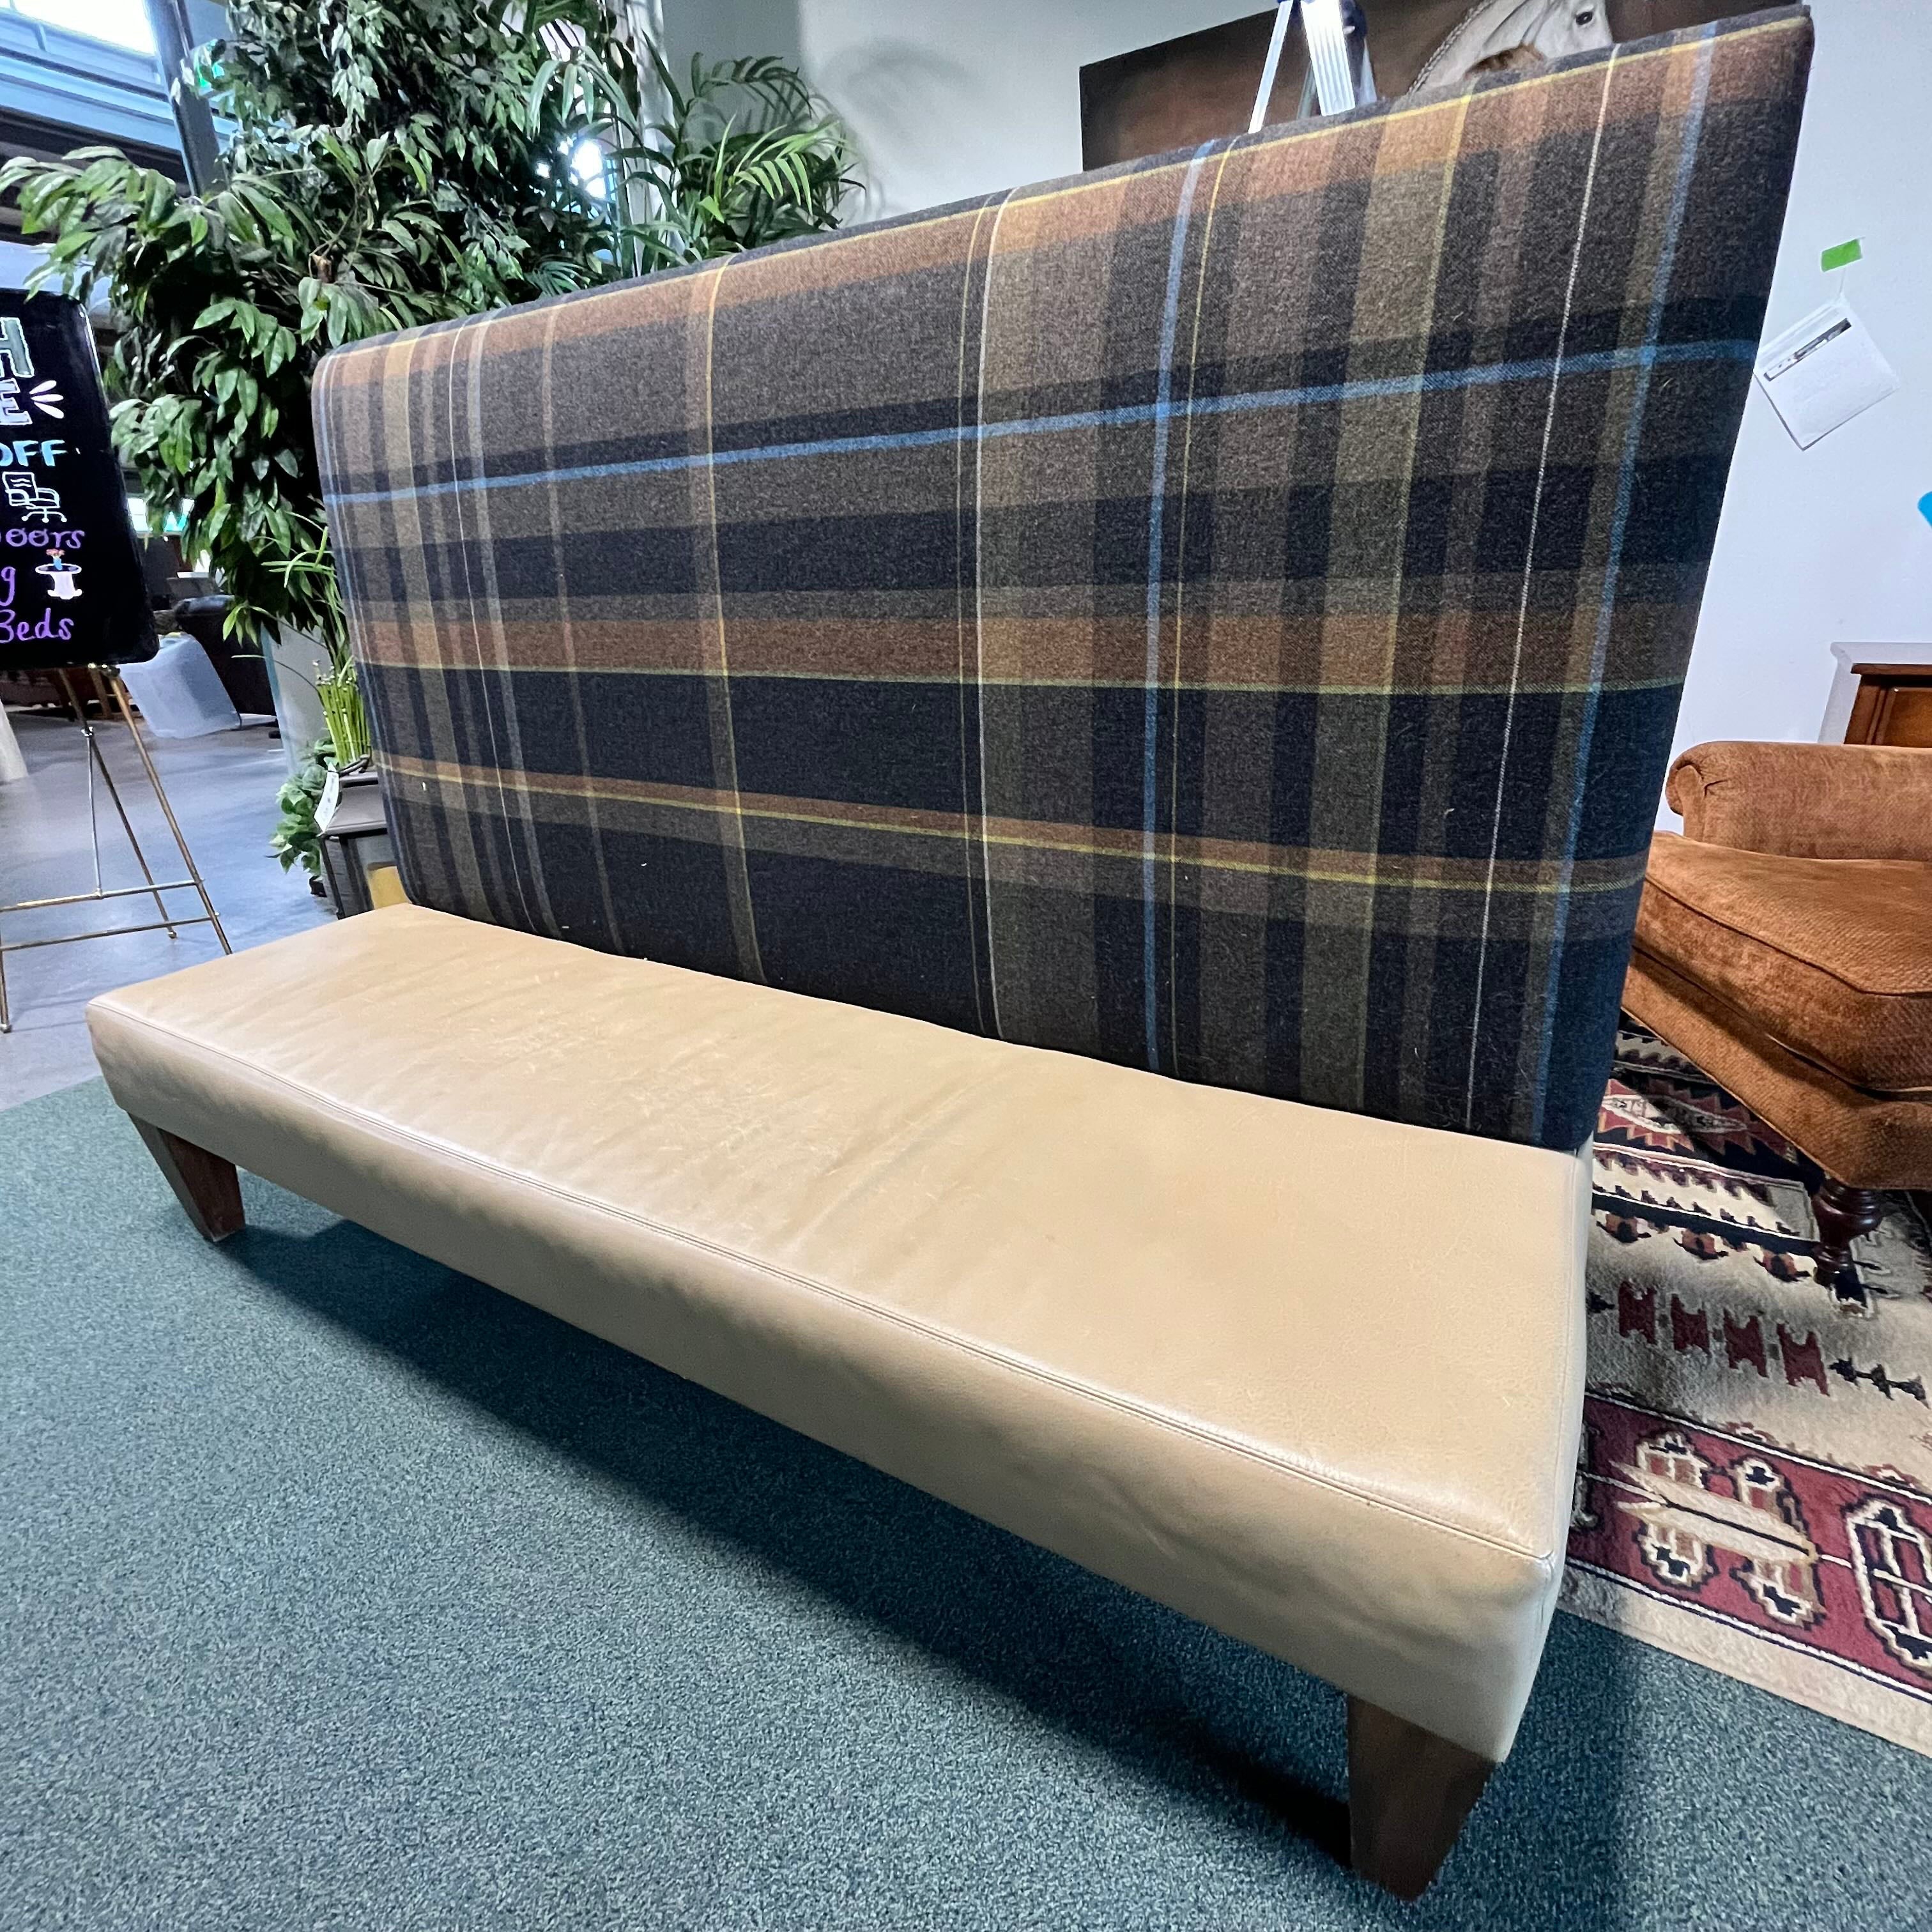 79"x 28"x 55" Leather and Wool Plaid High Back Bench